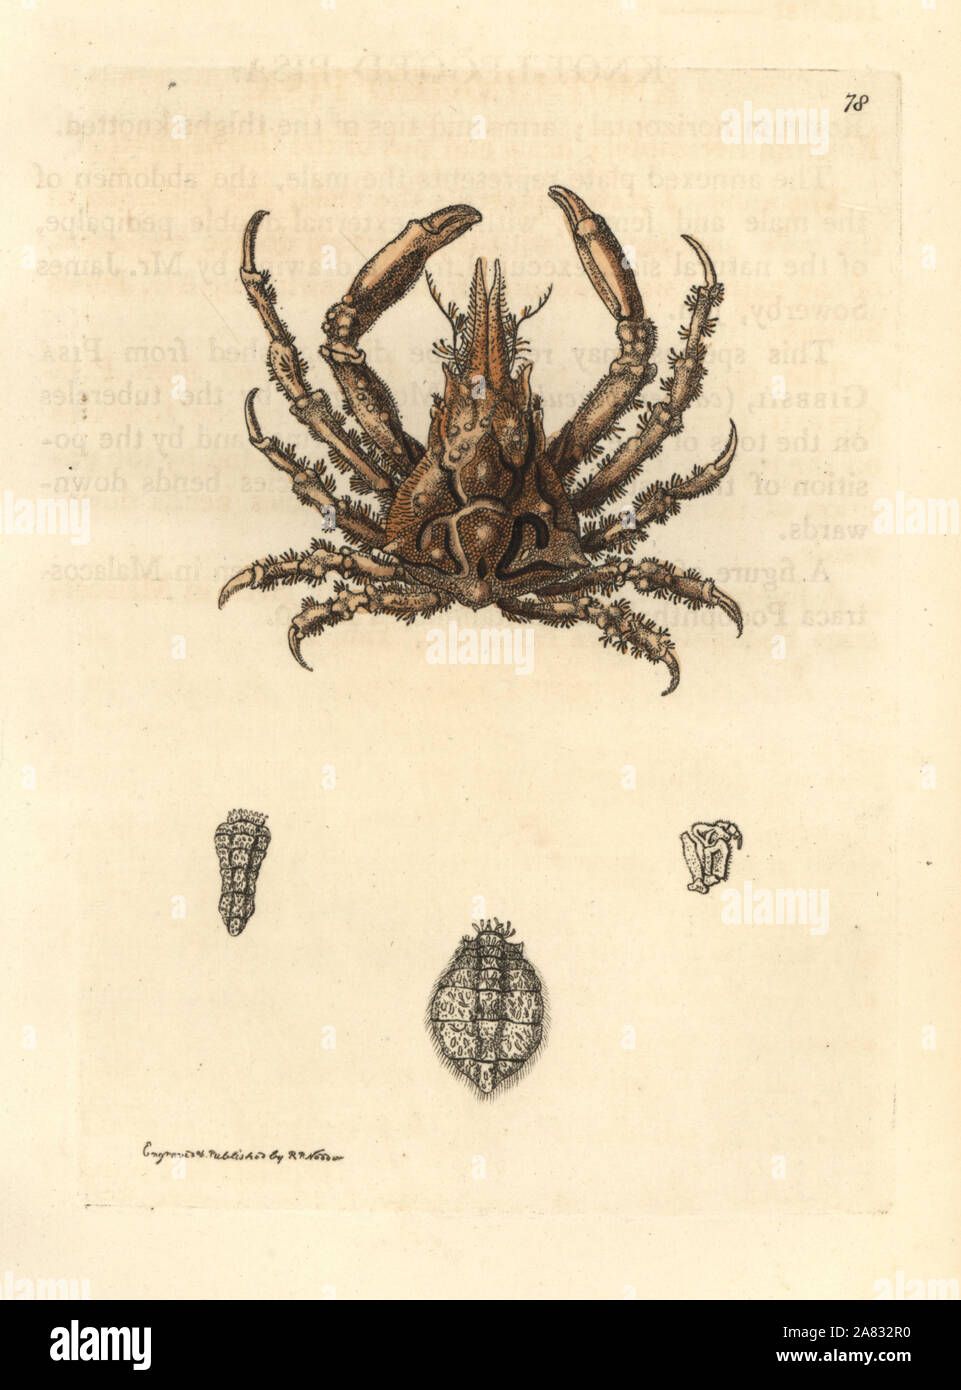 Knot-legged pisa crab, Pisa nodipes. Handcoloured copperplate engraving drawn and engraved by Richard Polydore Nodder from William Elford Leach's Zoological Miscellany, McMillan, London, 1815. Stock Photo